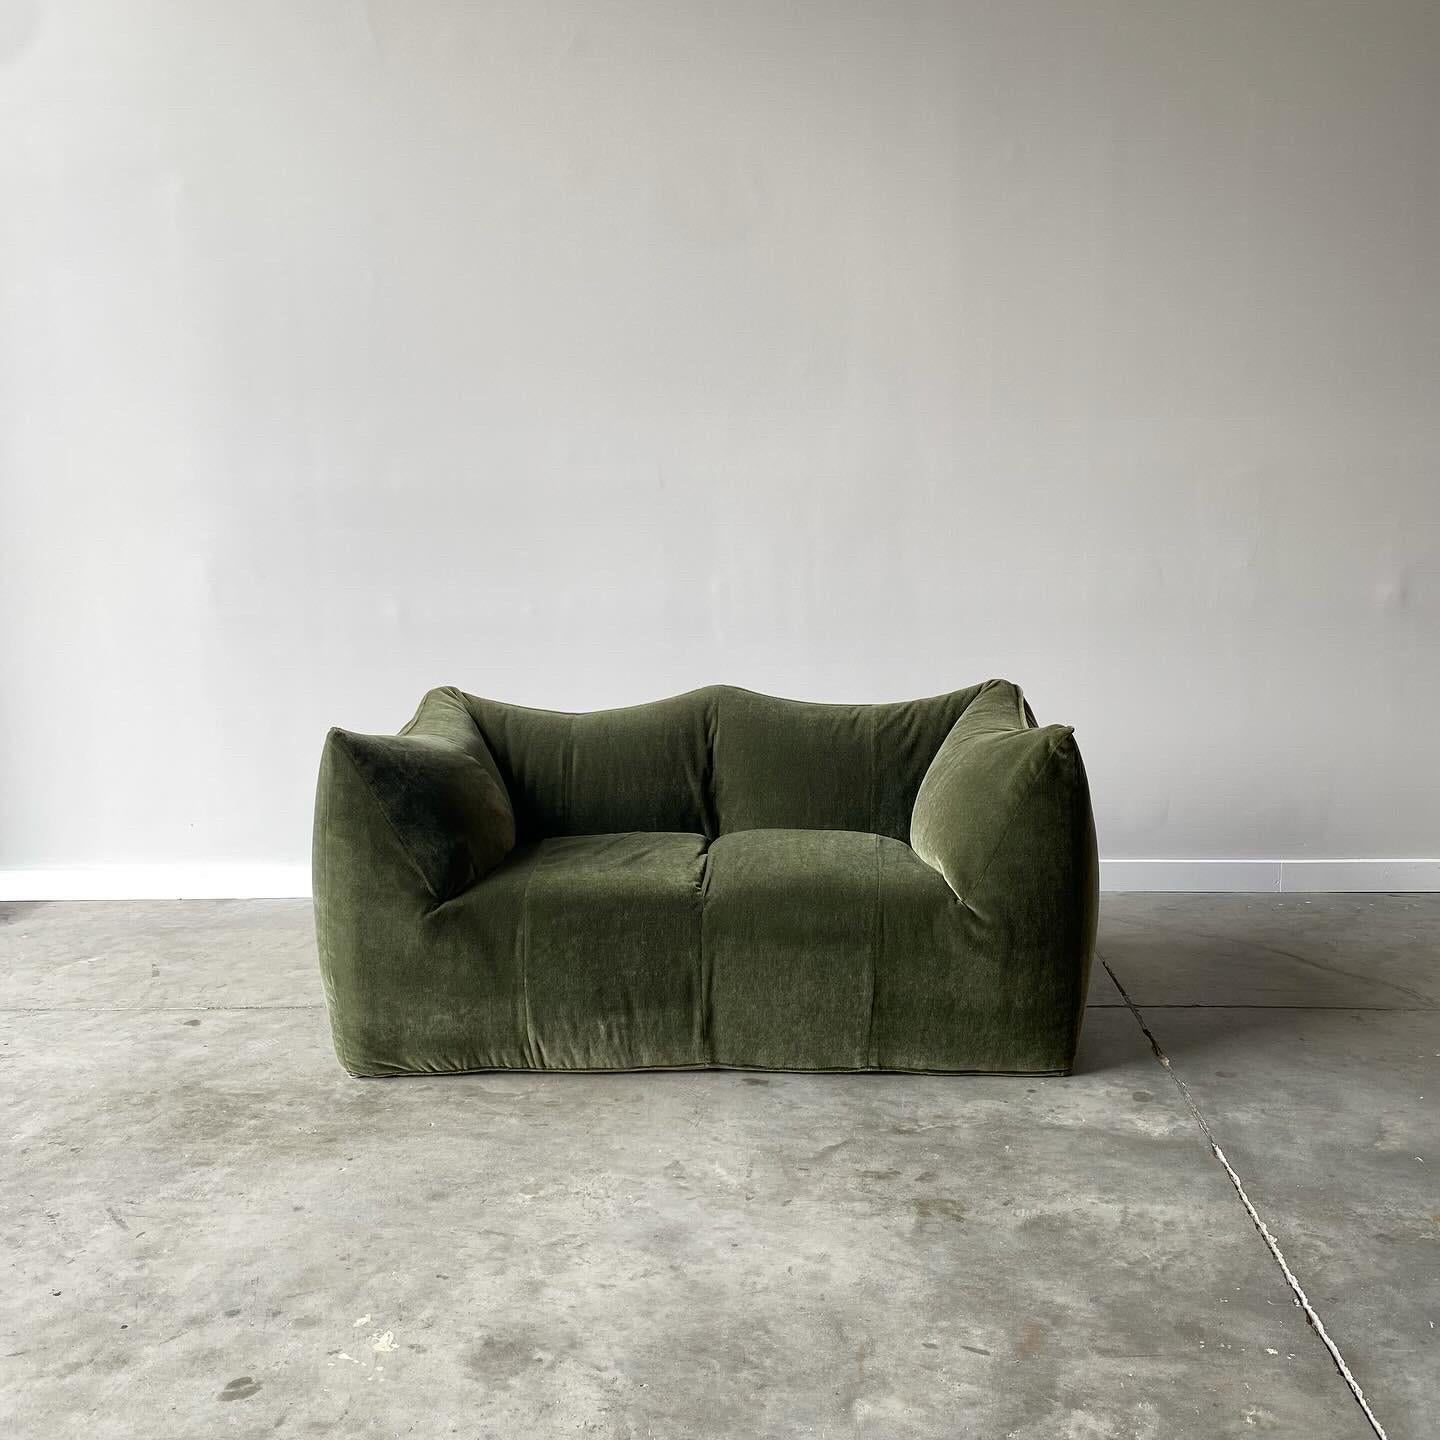 1970s Mario Bellini Le Bambole Sofa, Newly Upholstered in Mohair, B&B Italia

An icon newly restored.  Lush dusty green mohair over original form.  

66